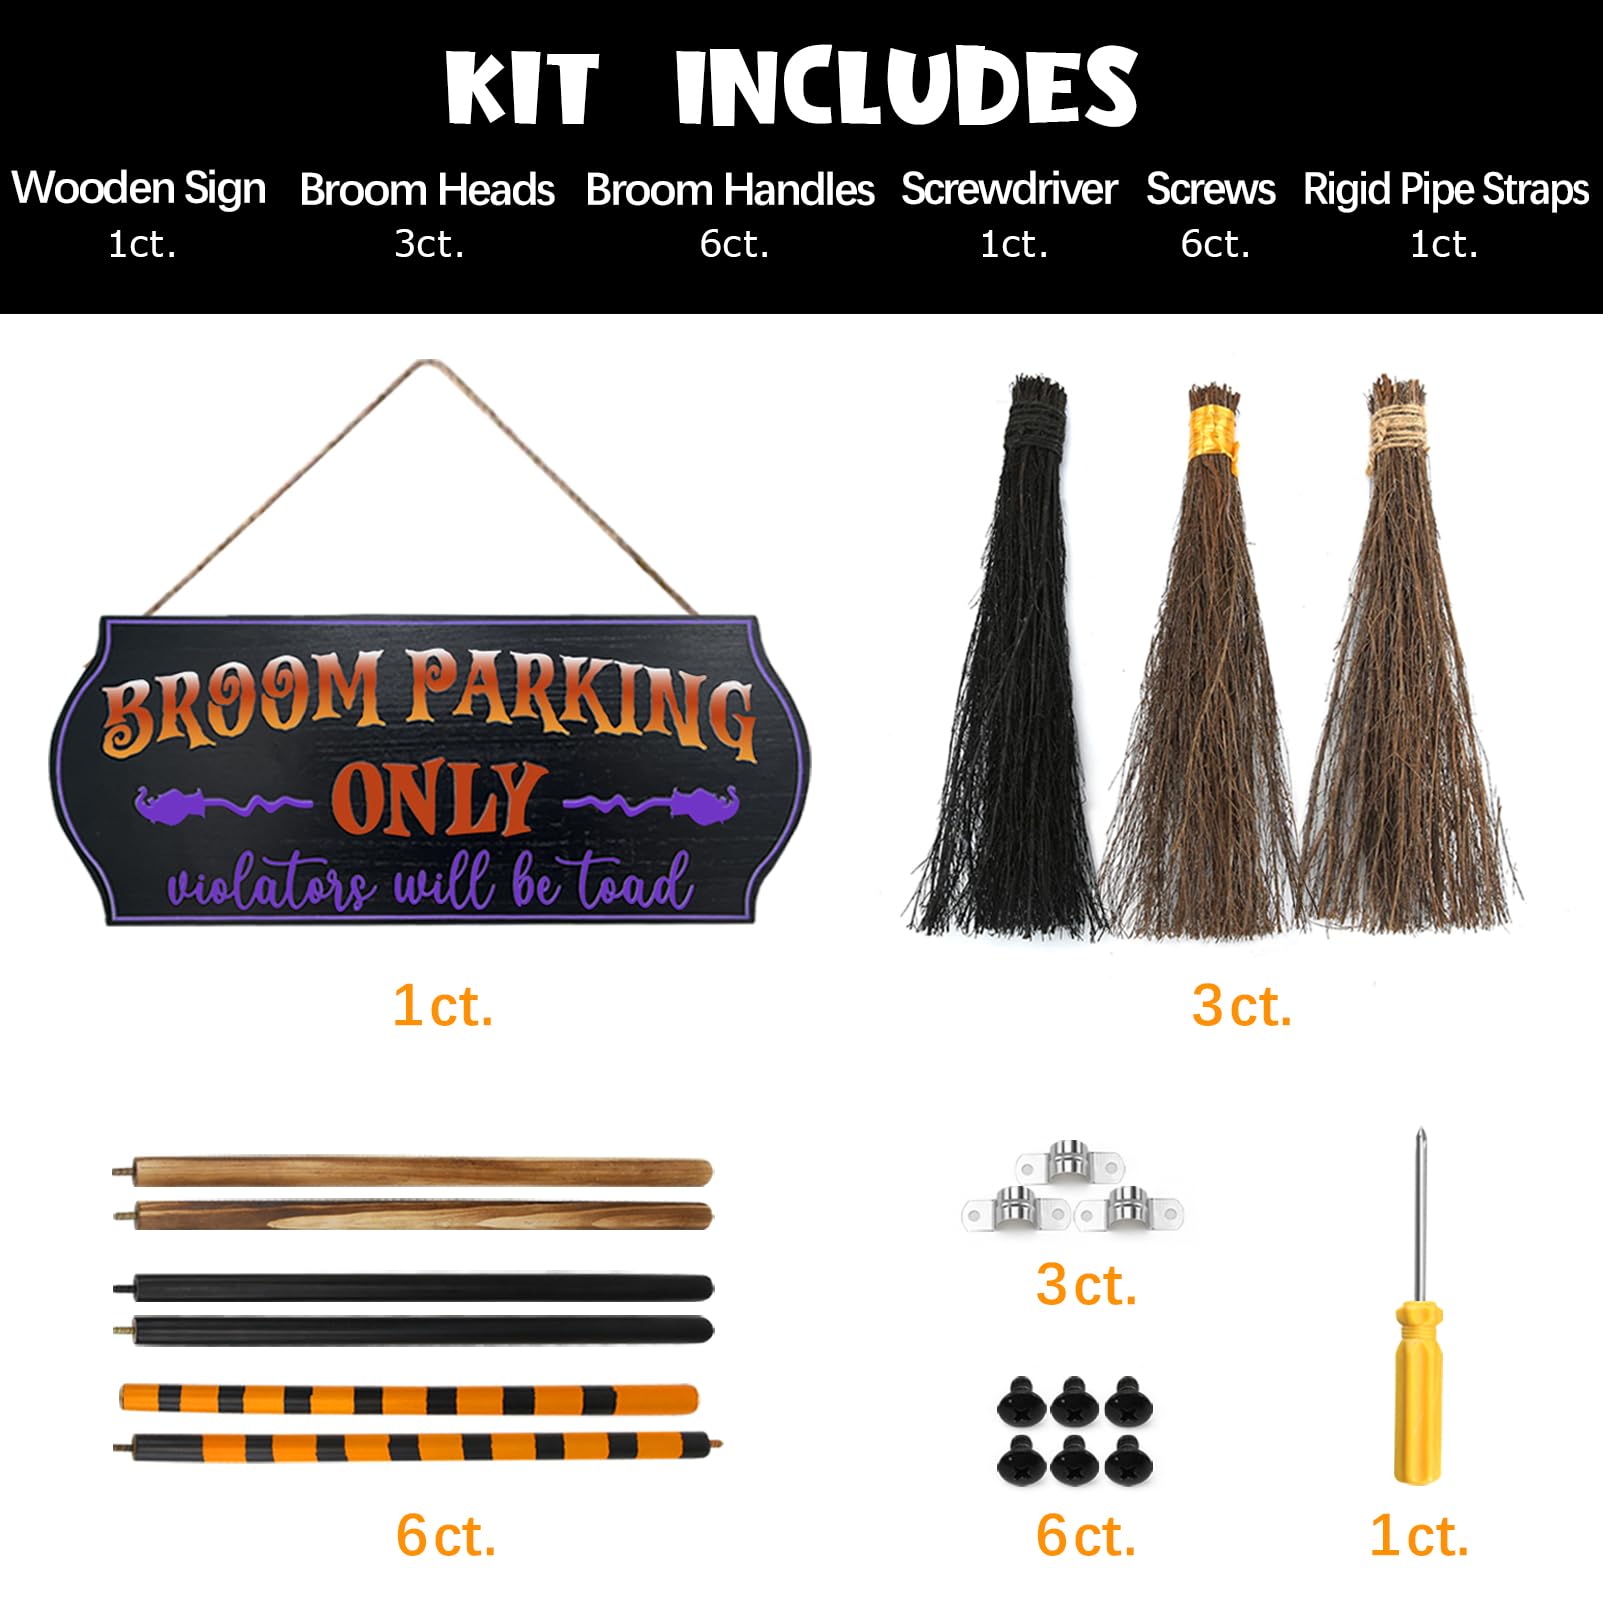 Kit includes